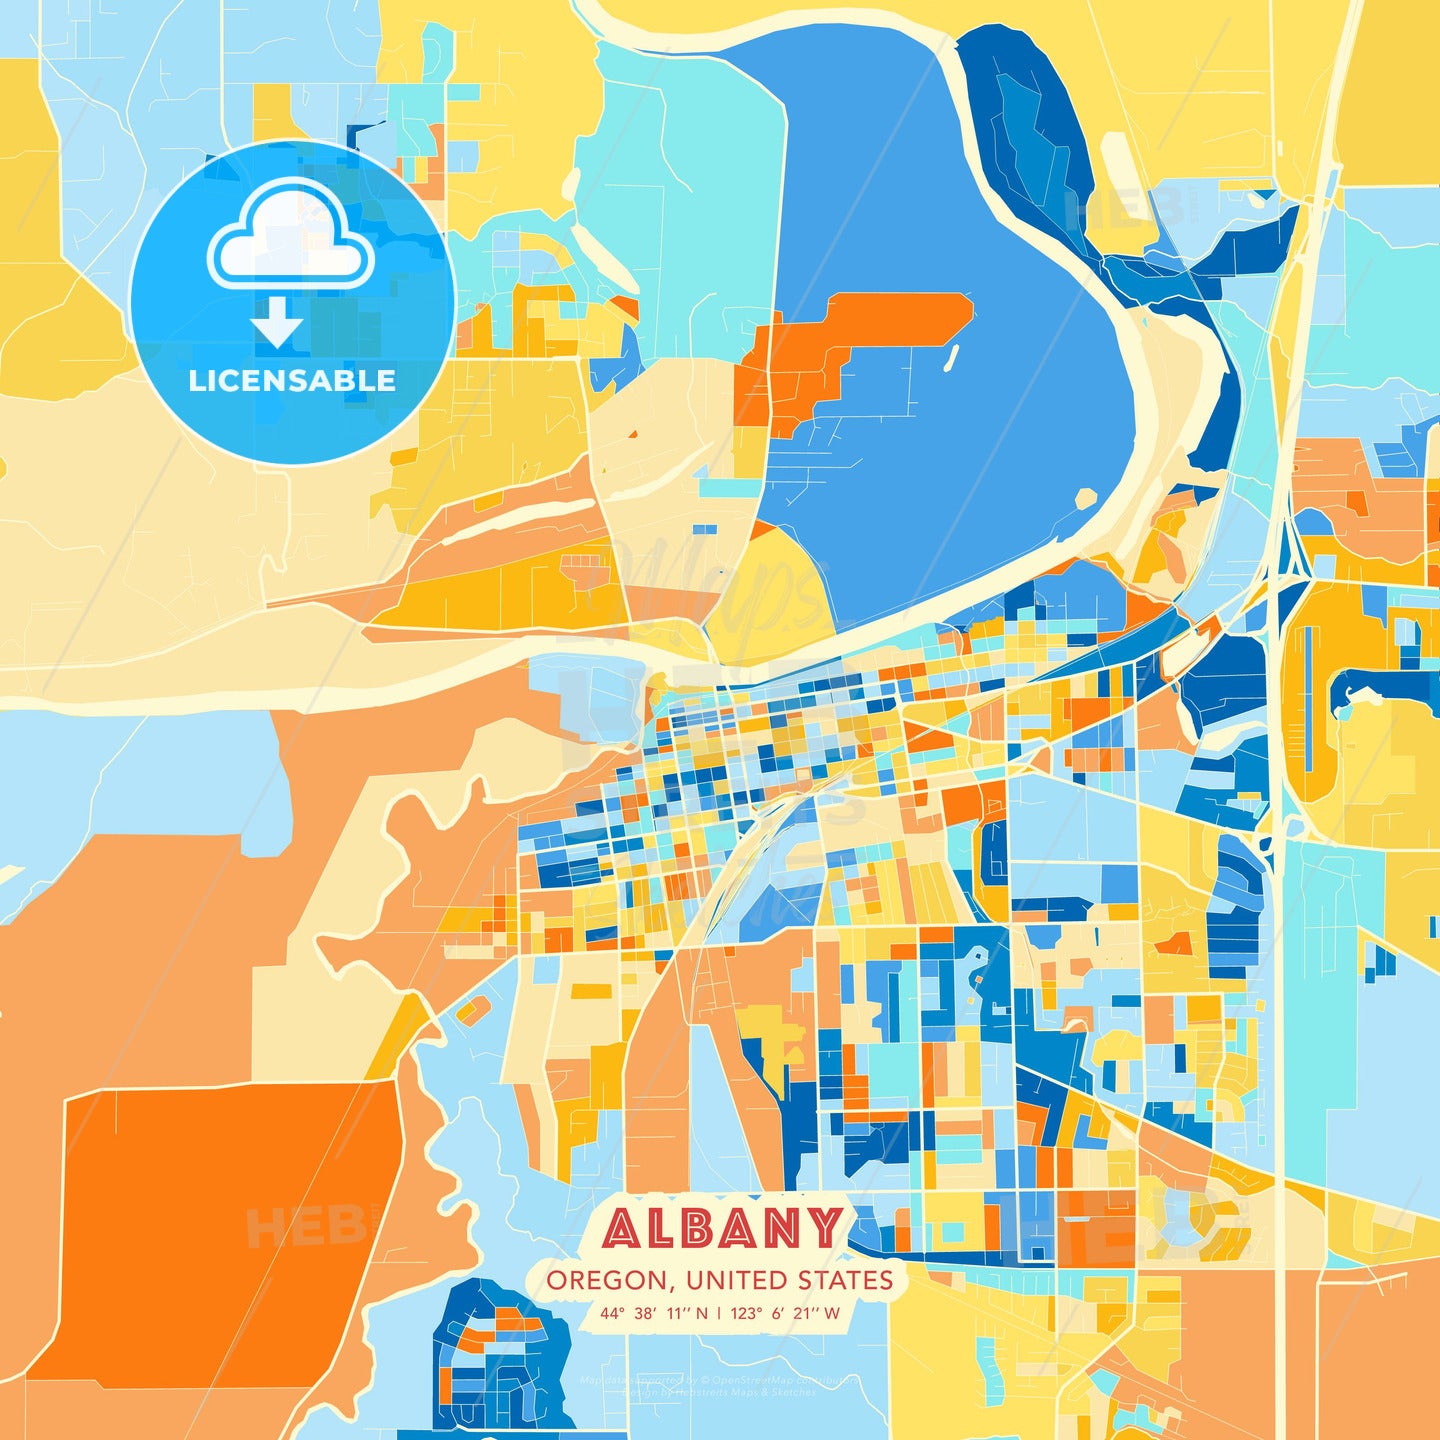 Albany, Oregon, United States, map - HEBSTREITS Sketches